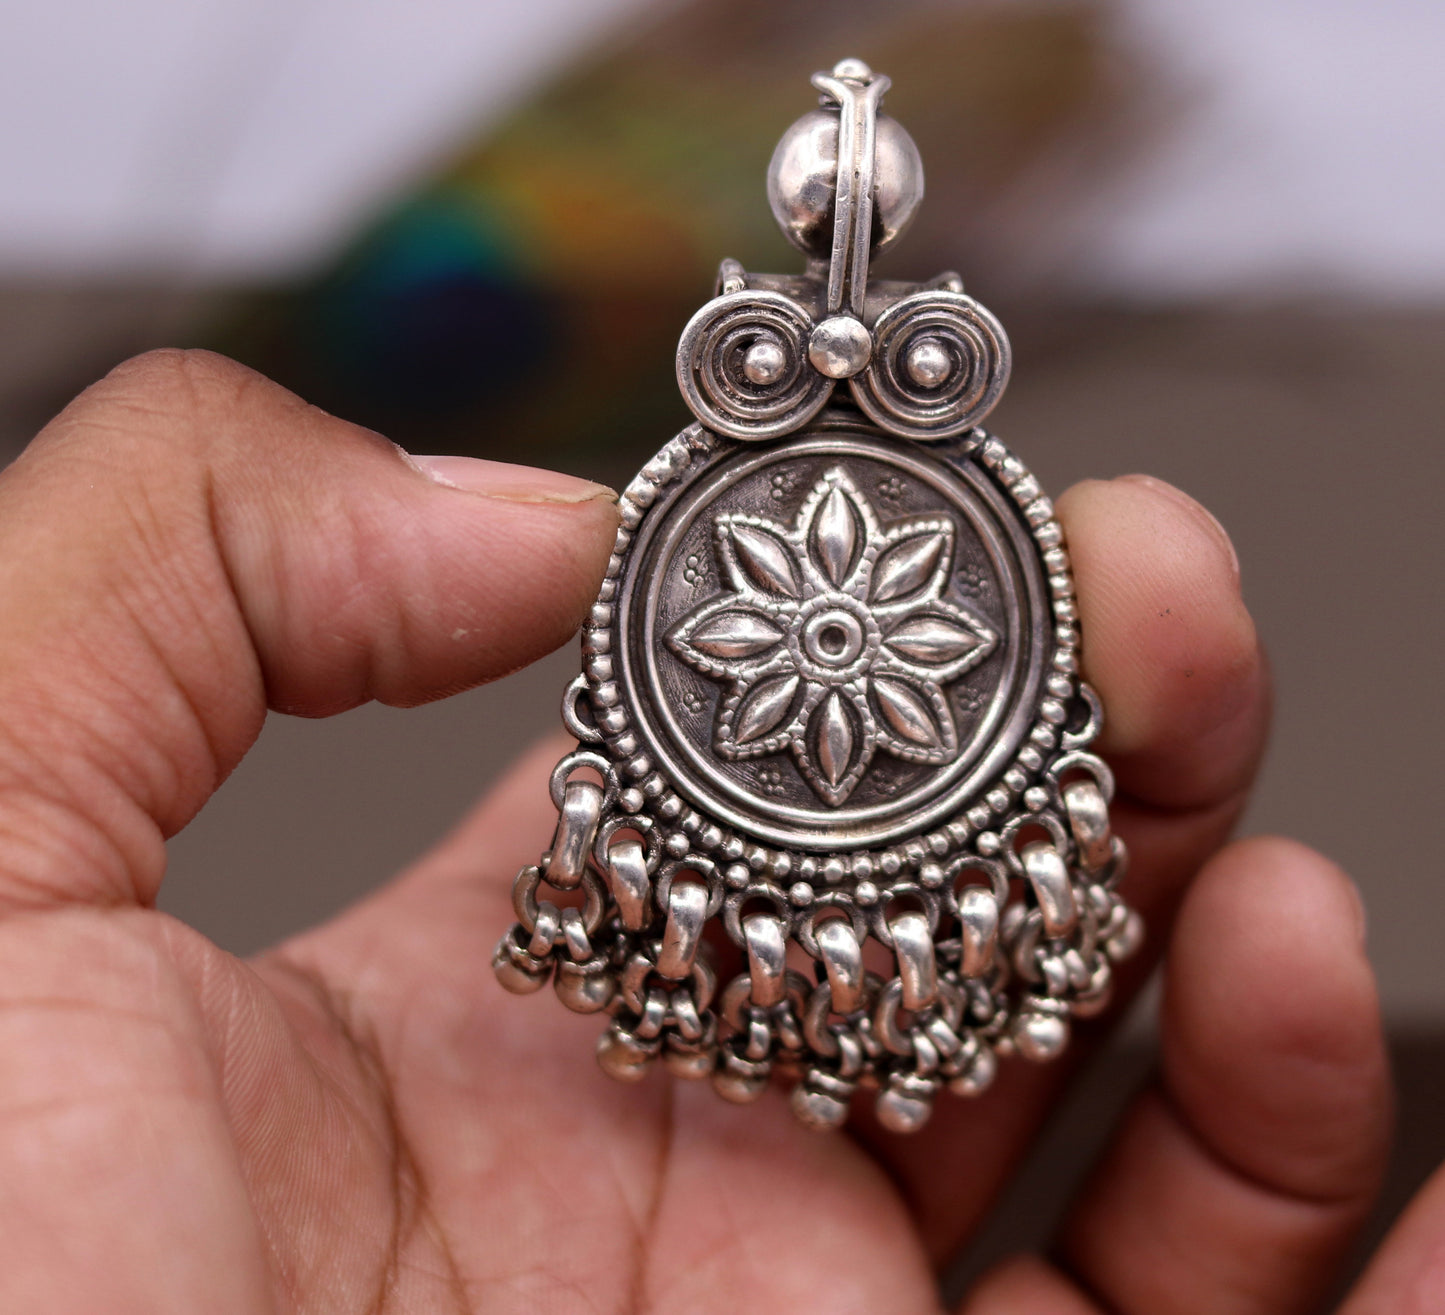 Handmade design 925 sterling silver excellent flower design vintage antique tribal pendant with hanging bells gifting jewelry nsp254 - TRIBAL ORNAMENTS